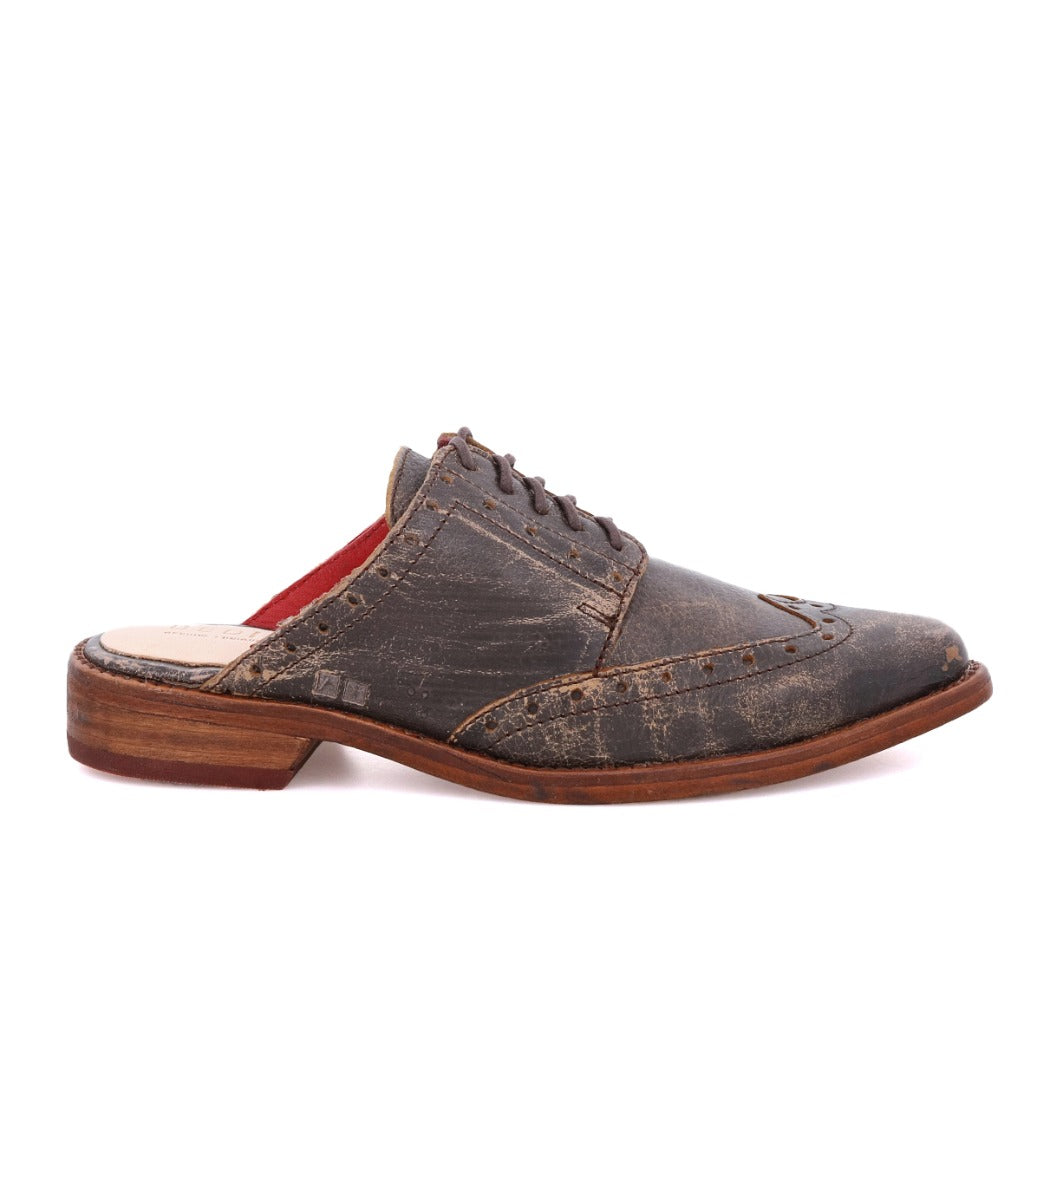 A pair of Mickie men's brown oxford shoes with a red sole by Bed Stu.